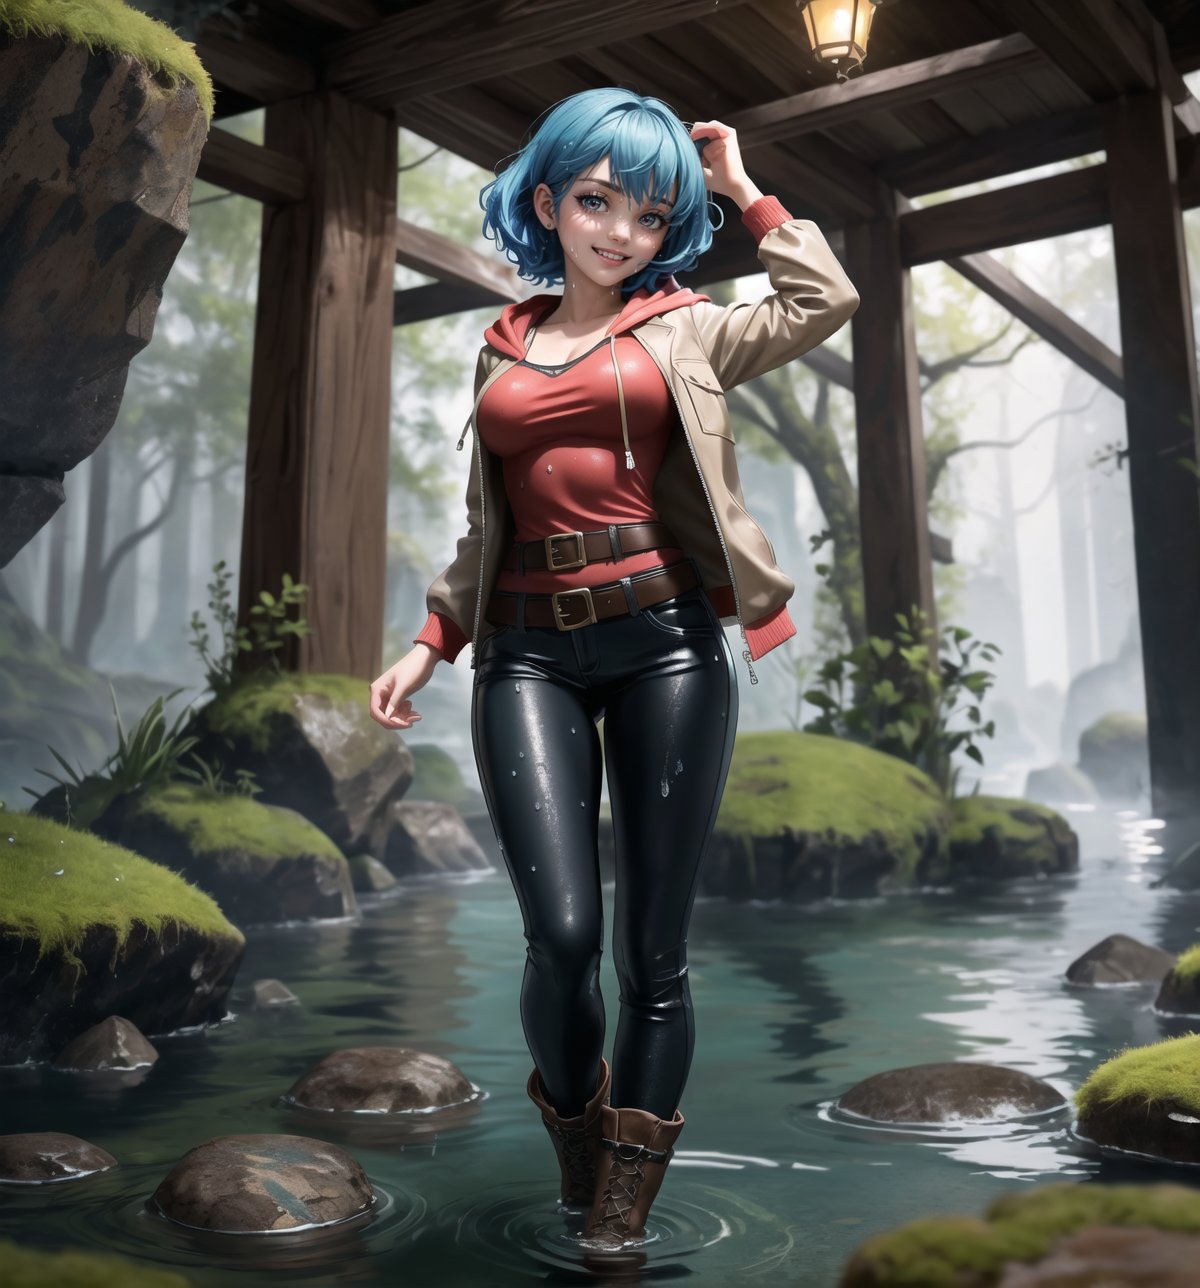 An ultra-detailed 4K masterpiece, combining fantasy and adventure styles, rendered in high resolution with sharp details. | A 23-year-old adventurer, dressed in a brown leather suit, explores a mysterious water temple during a night of torrential rain. Her outfit consists of a hooded jacket, tight pants, high boots, and a belt with multiple compartments to store her belongings. Her short, unkempt ((blue hair)) is wet from the rain, giving her a wild, disheveled look. Her red eyes shine with determination and curiosity, while ((she looks and smiles at the viewer, showing her white teeth)). | The image highlights the adventurer's athletic figure and the humid and gloomy environment of the water temple. The temple's ancient, rocky structures are covered in mosses and algae, suggesting that it has been submerged for a long time. Heavy rain hits the surrounding rocks, creating an immersive and realistic sound effect. The dim and mysterious lighting is created by some spotlights installed on the walls, highlighting the rough textures of the rocks and creating dramatic shadows. | Dark, cinematic lighting effects create a tense and exciting atmosphere, while detailed textures on the rocks, moss and leather suit add realism to the image. | A thrilling and suspenseful scene of a young adventurer exploring a mysterious water temple during a night of torrential rain, combining the styles of fantasy and adventure. | (((The image reveals a full-body shot as the woman assumes a sensual pose, engagingly leaning against a structure within the scene in an exciting manner. She takes on a sensual pose as she interacts, boldly leaning on a structure, leaning back and boldly throwing herself onto the structure, reclining back in an exhilarating way.))). | ((((full-body shot)))), ((perfect pose)), ((perfect arms):1.2), ((perfect limbs, perfect fingers, better hands, perfect hands, hands)), ((perfect legs, perfect feet):1.2), ((perfect design)), ((perfect composition)), ((very detailed scene, very detailed background, perfect layout, correct imperfections)), ((Enhance, Ultra details)), ((poakl)), ((More Detail))